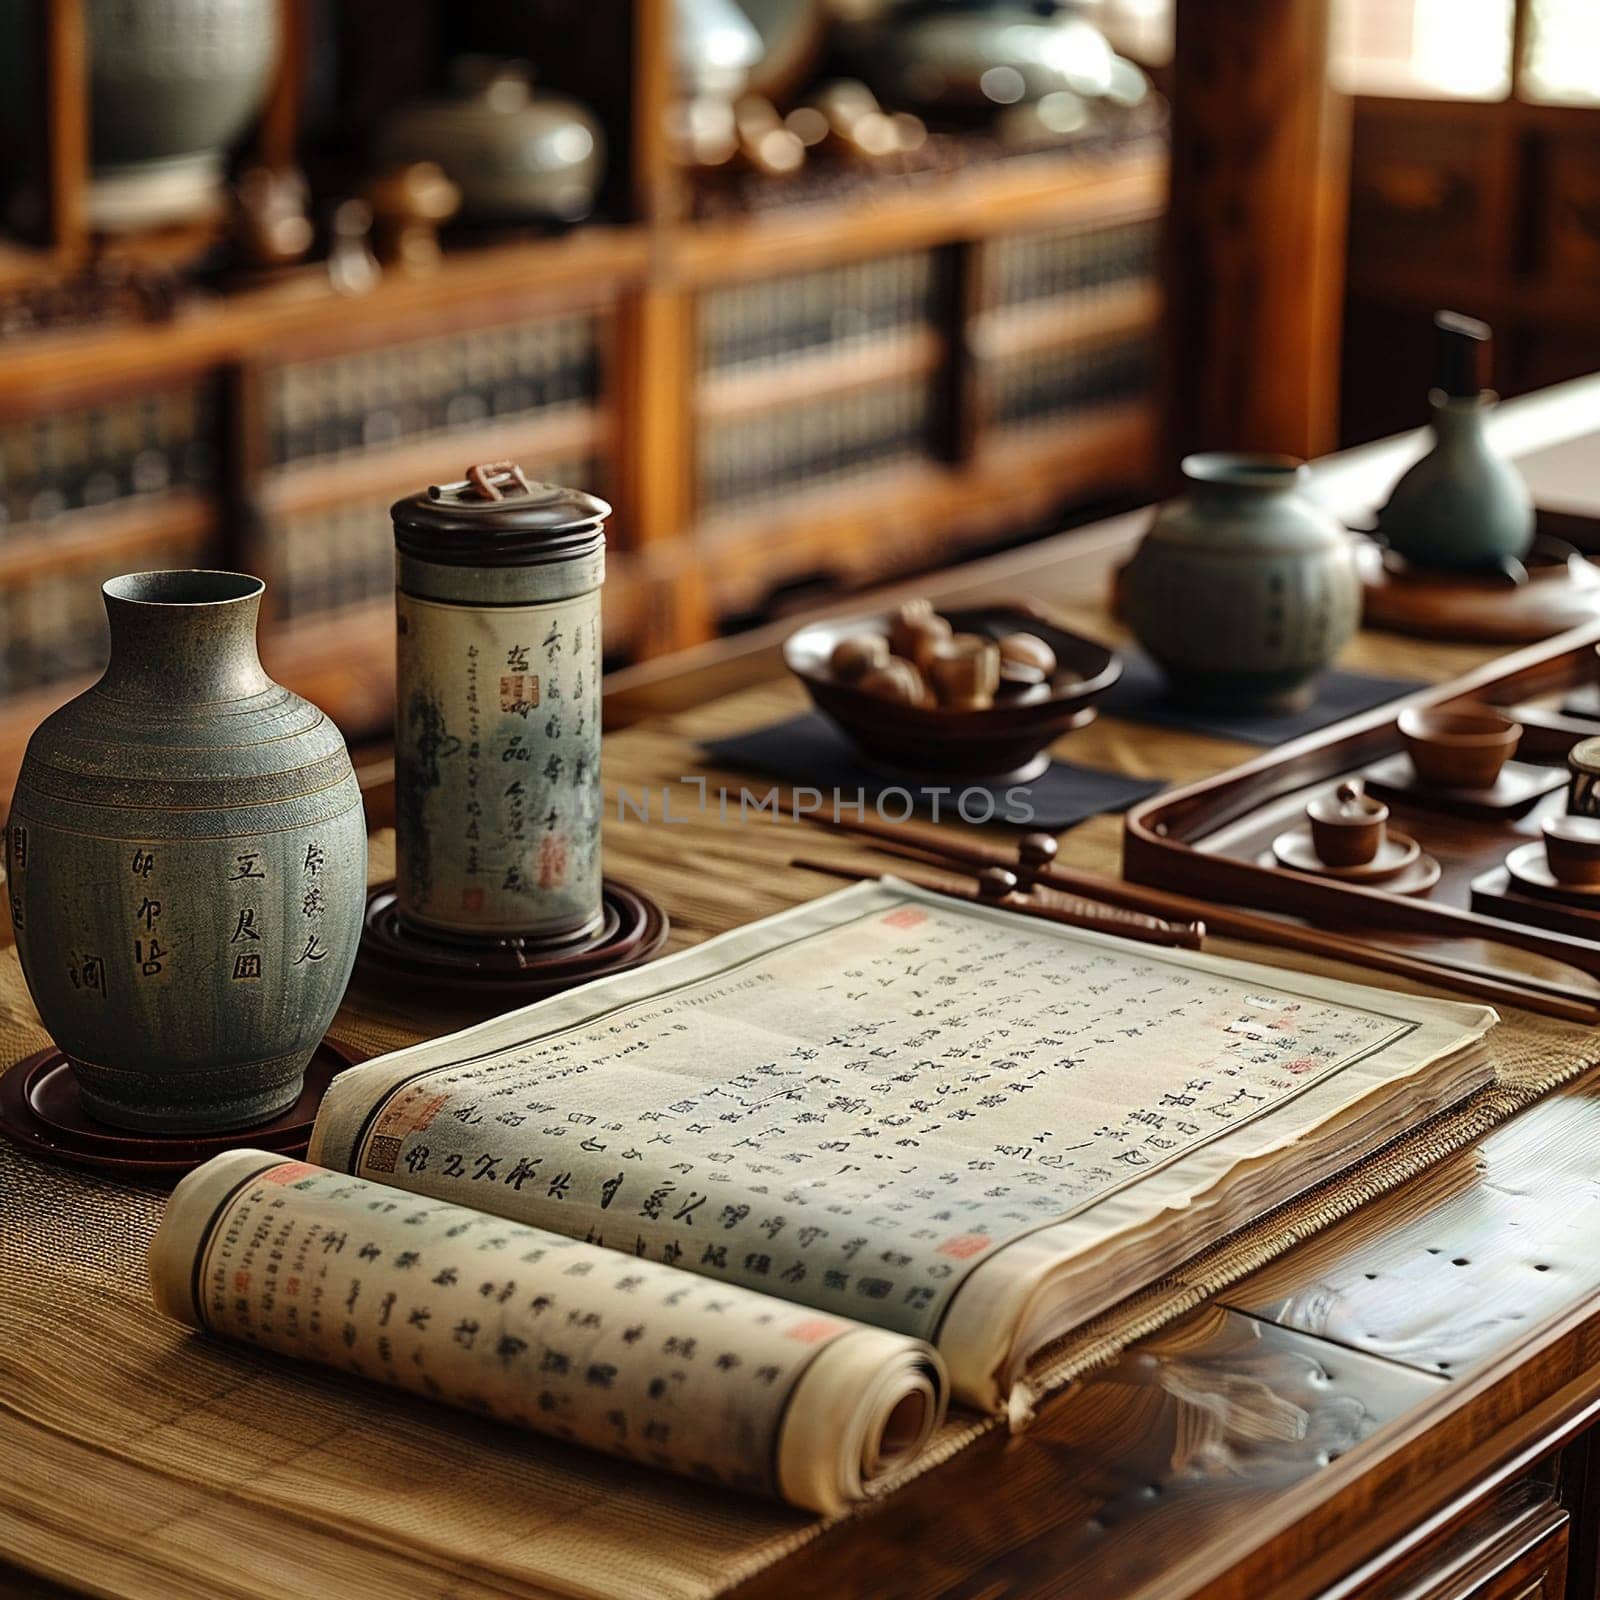 Confucian Scrolls Displayed in a Scholar's Study, The text blurs into paper, signifying wisdom and the pursuit of knowledge.